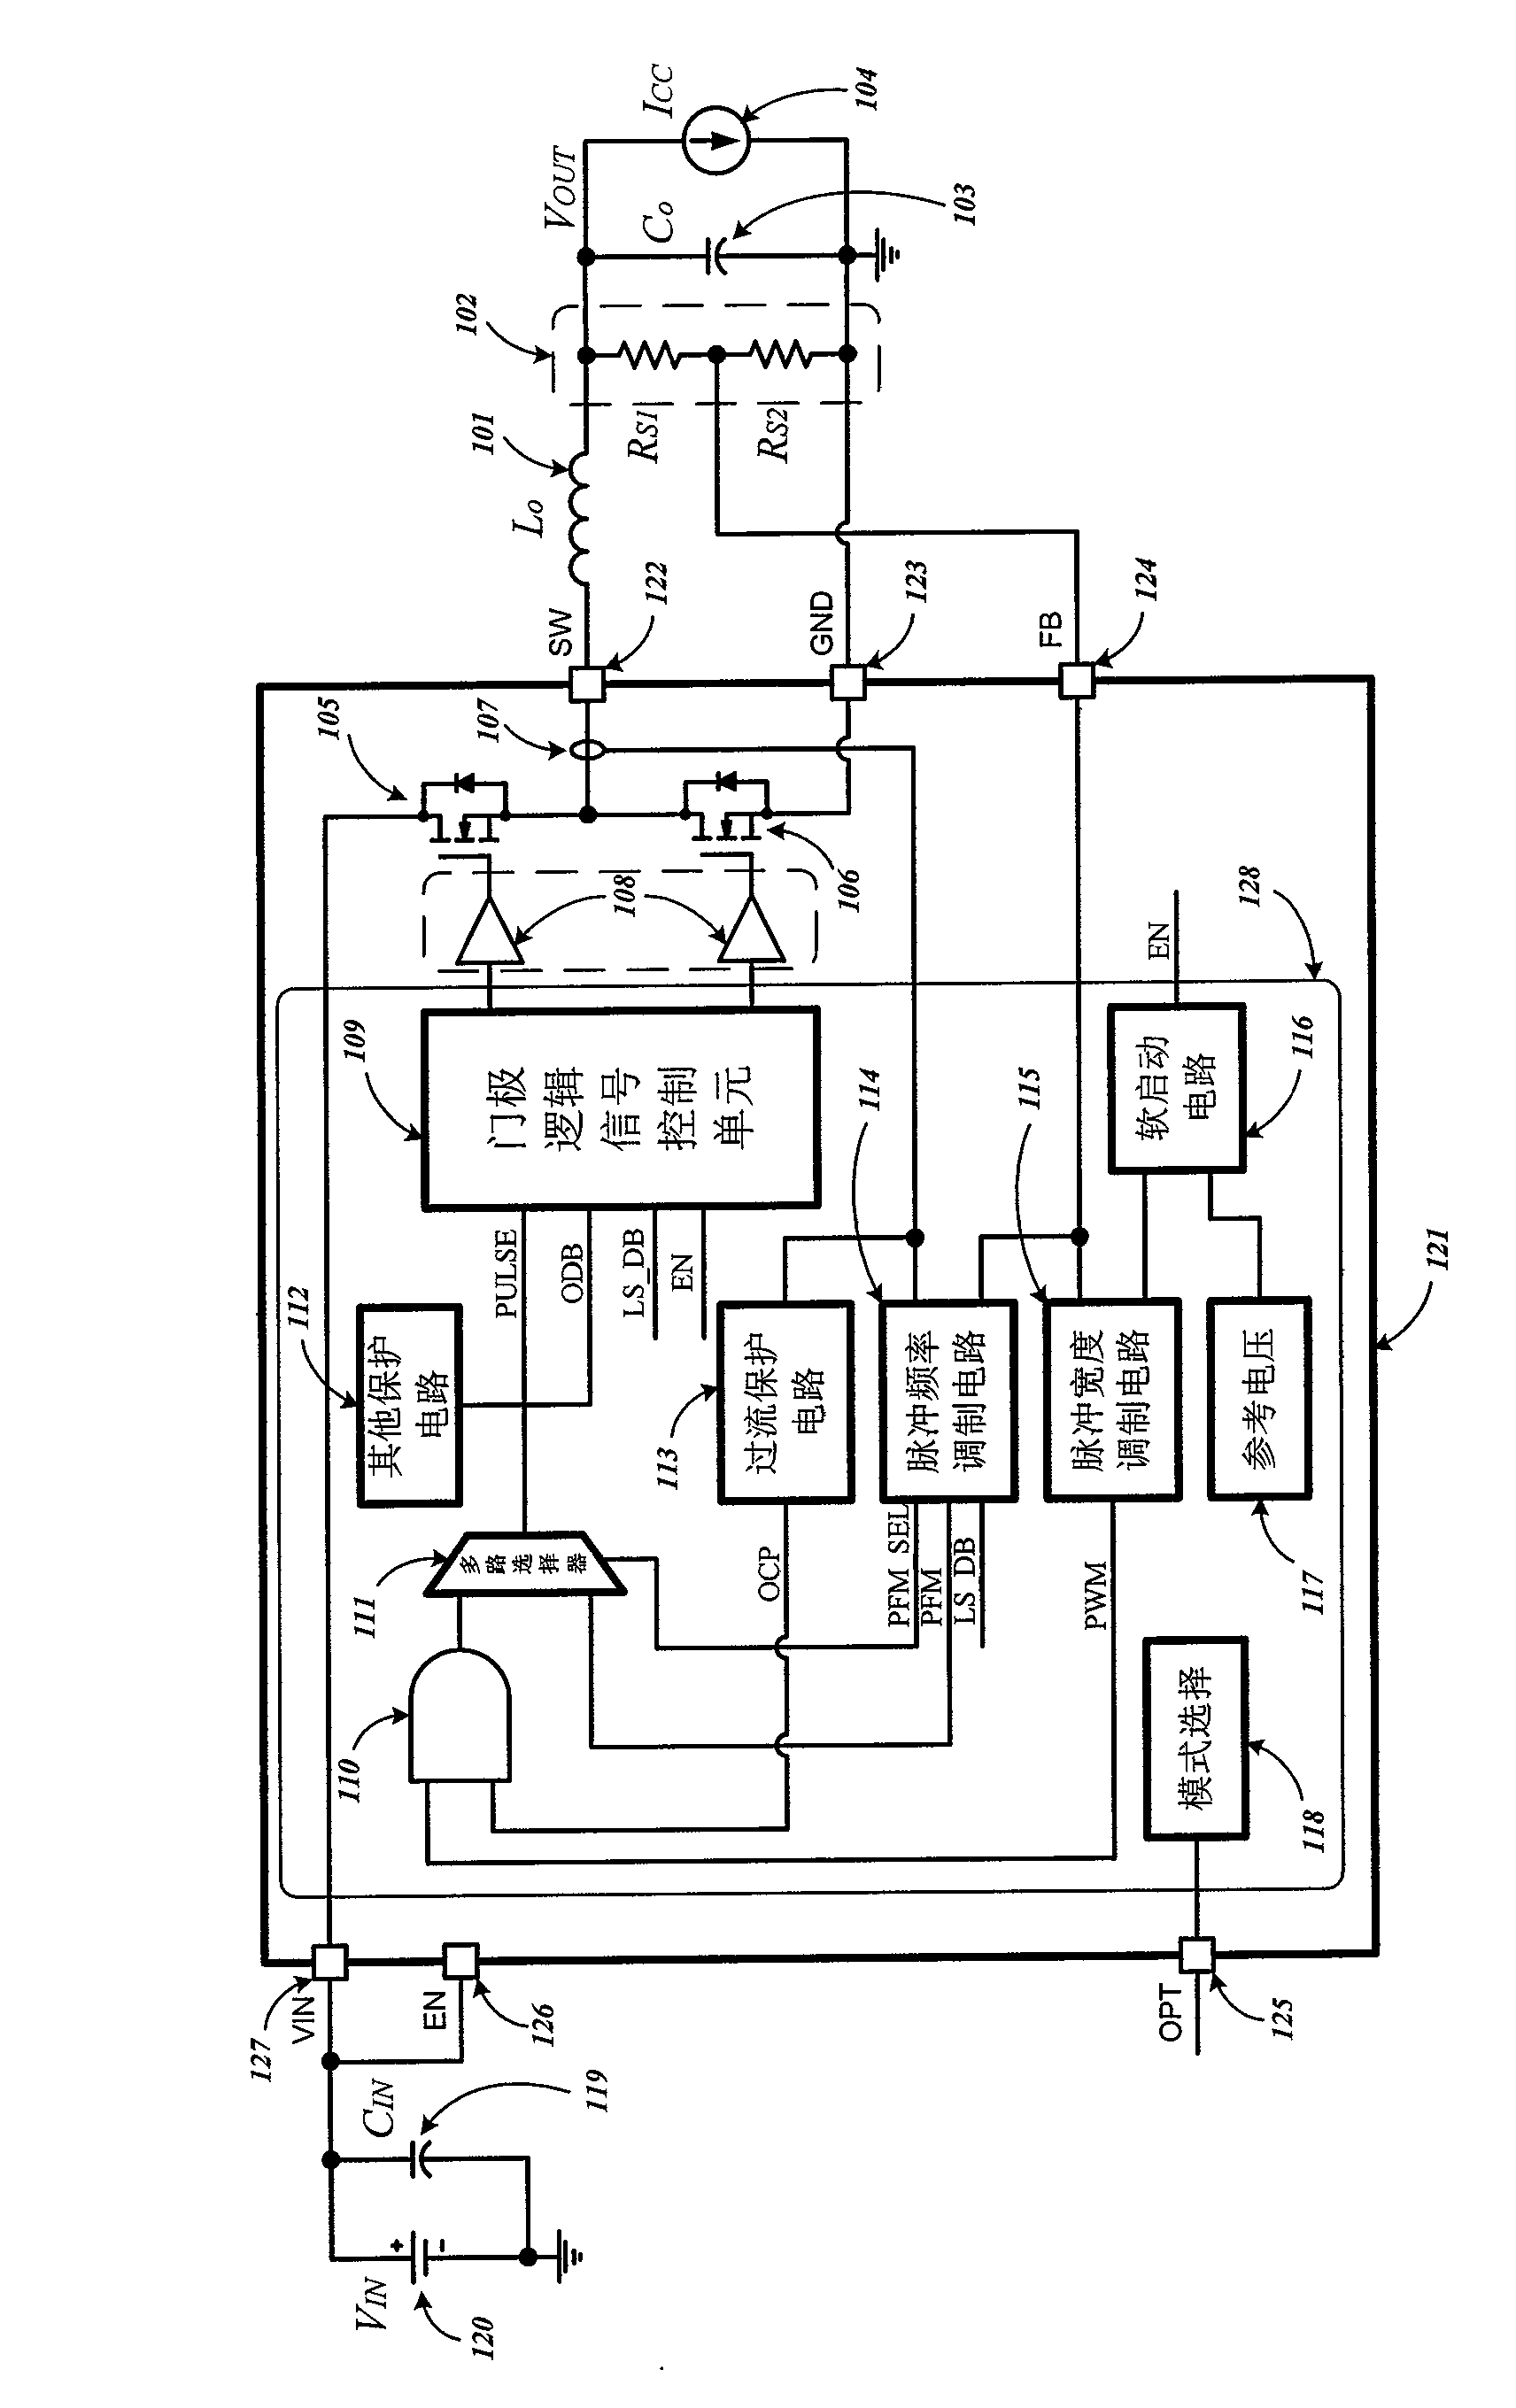 Control method and circuit of double-module modulation and mode smooth conversion switching power supply